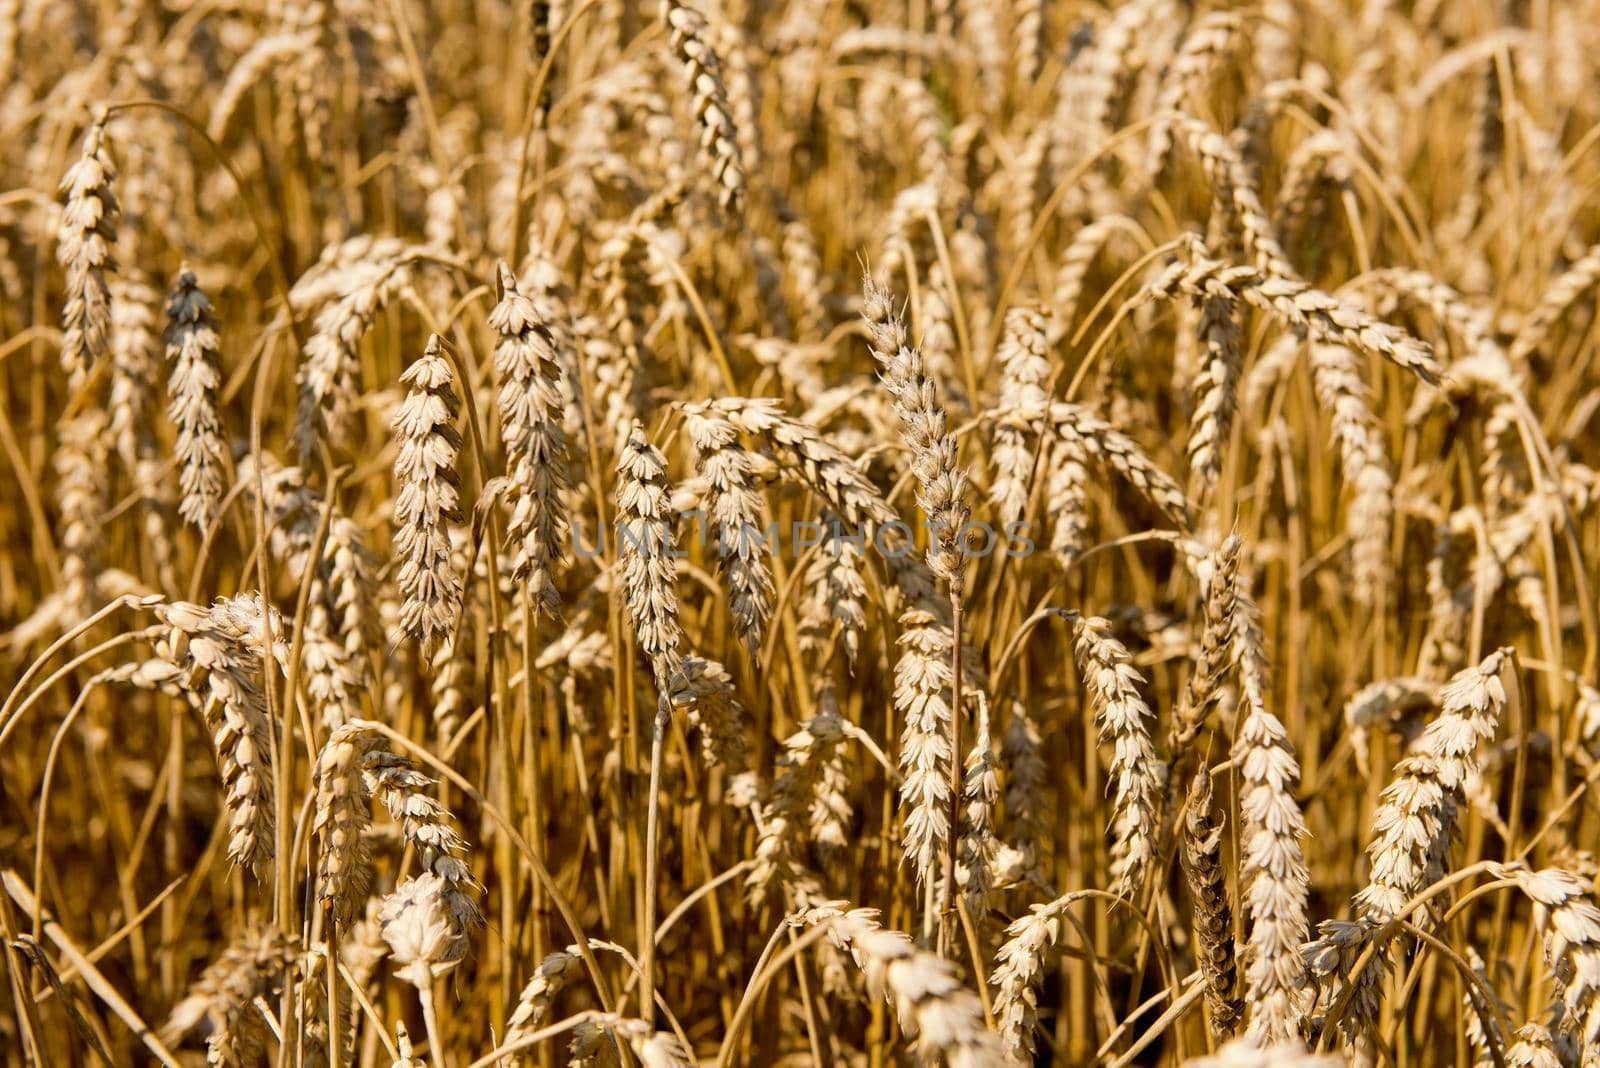 Spikelets of wheat against the background of a wheat field.